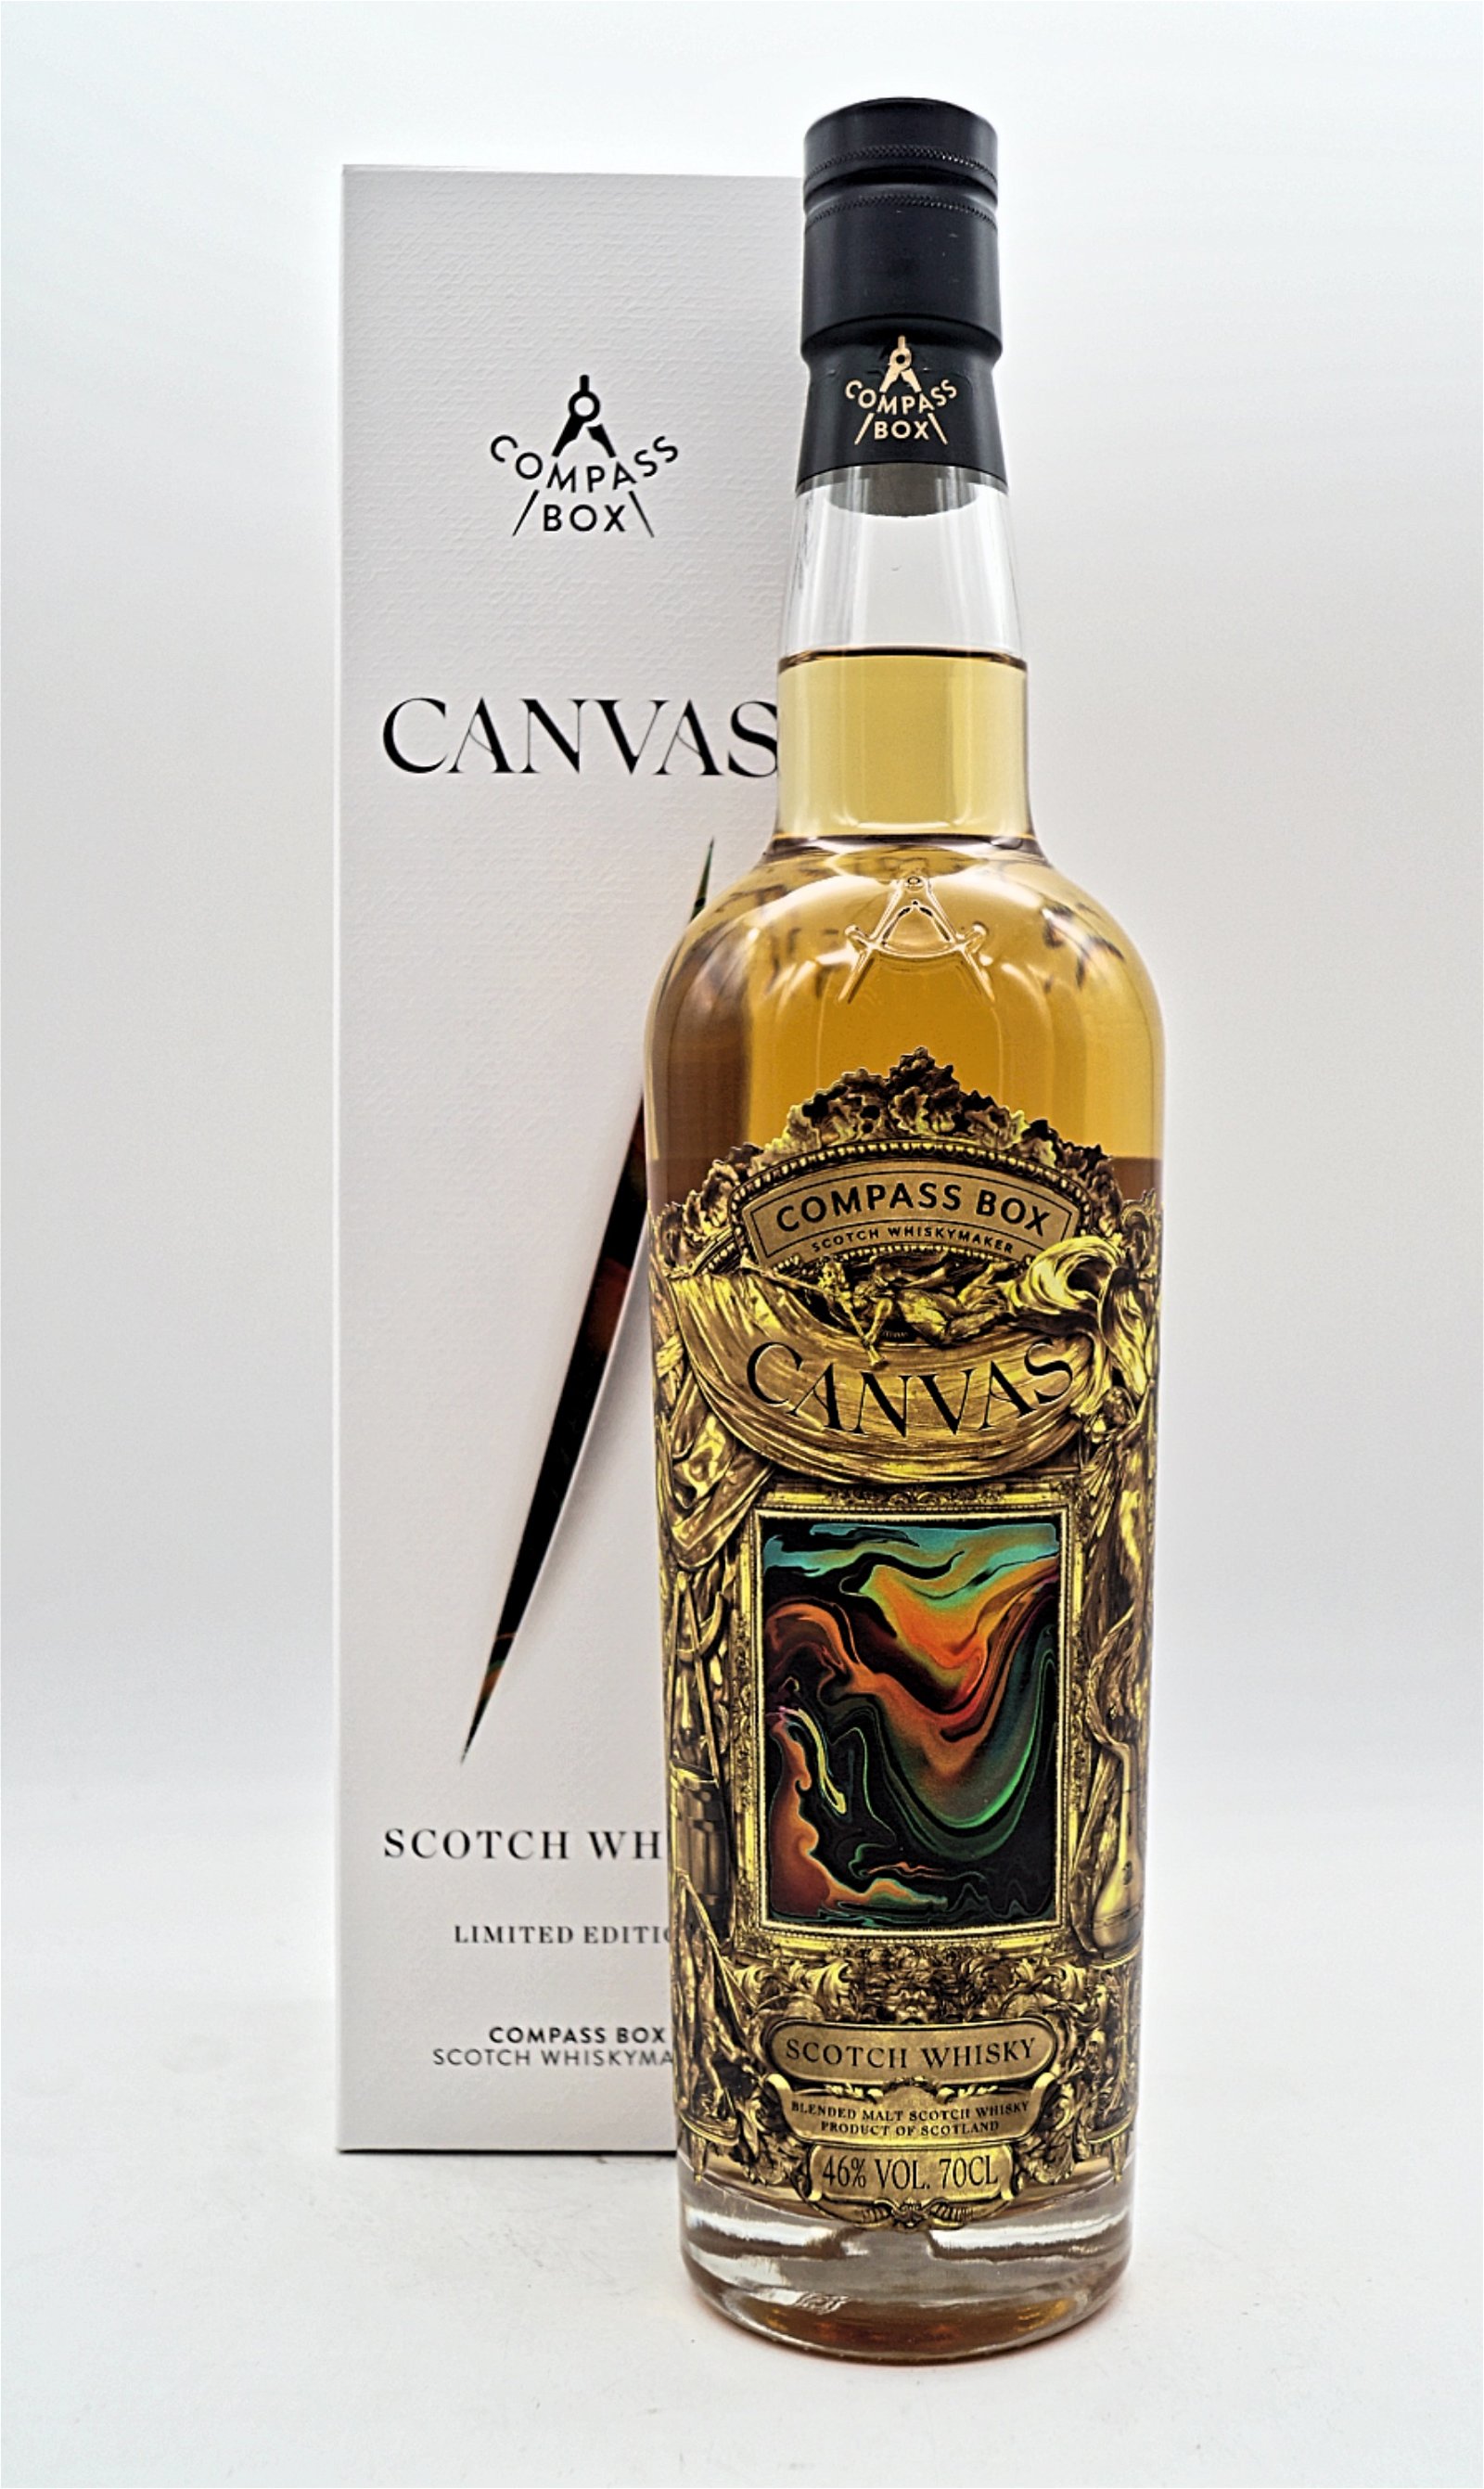 Compass Box Canvas Limited Edition Blended Malt Scotch Whisky